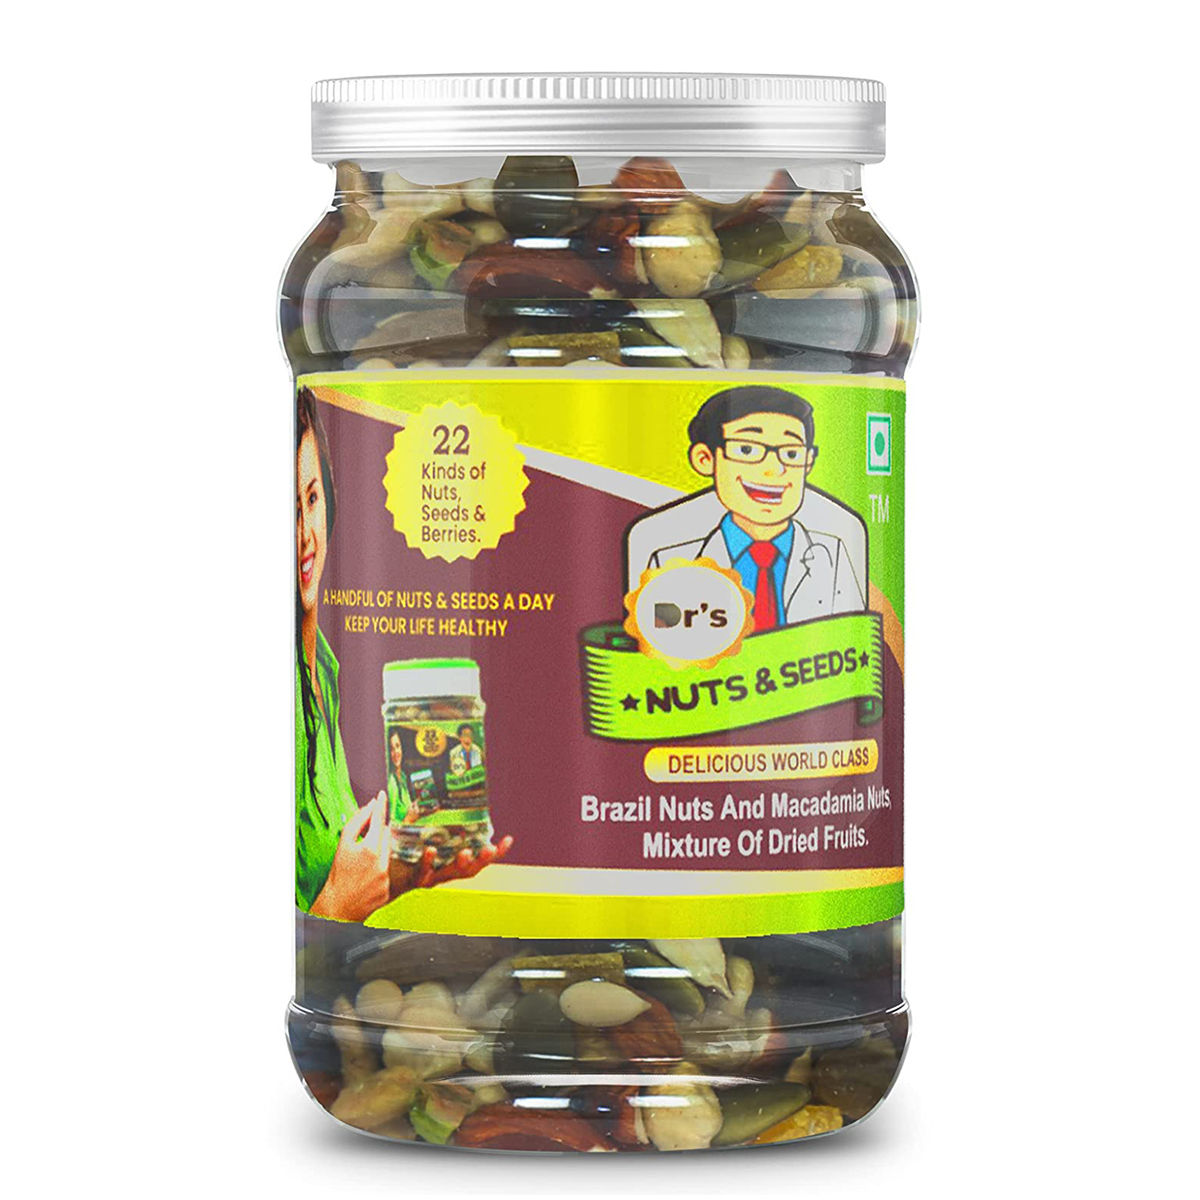 Buy Dr's Nuts & Seeds Natural, Healthy Dried Fruits Mixture, 300 gm Online